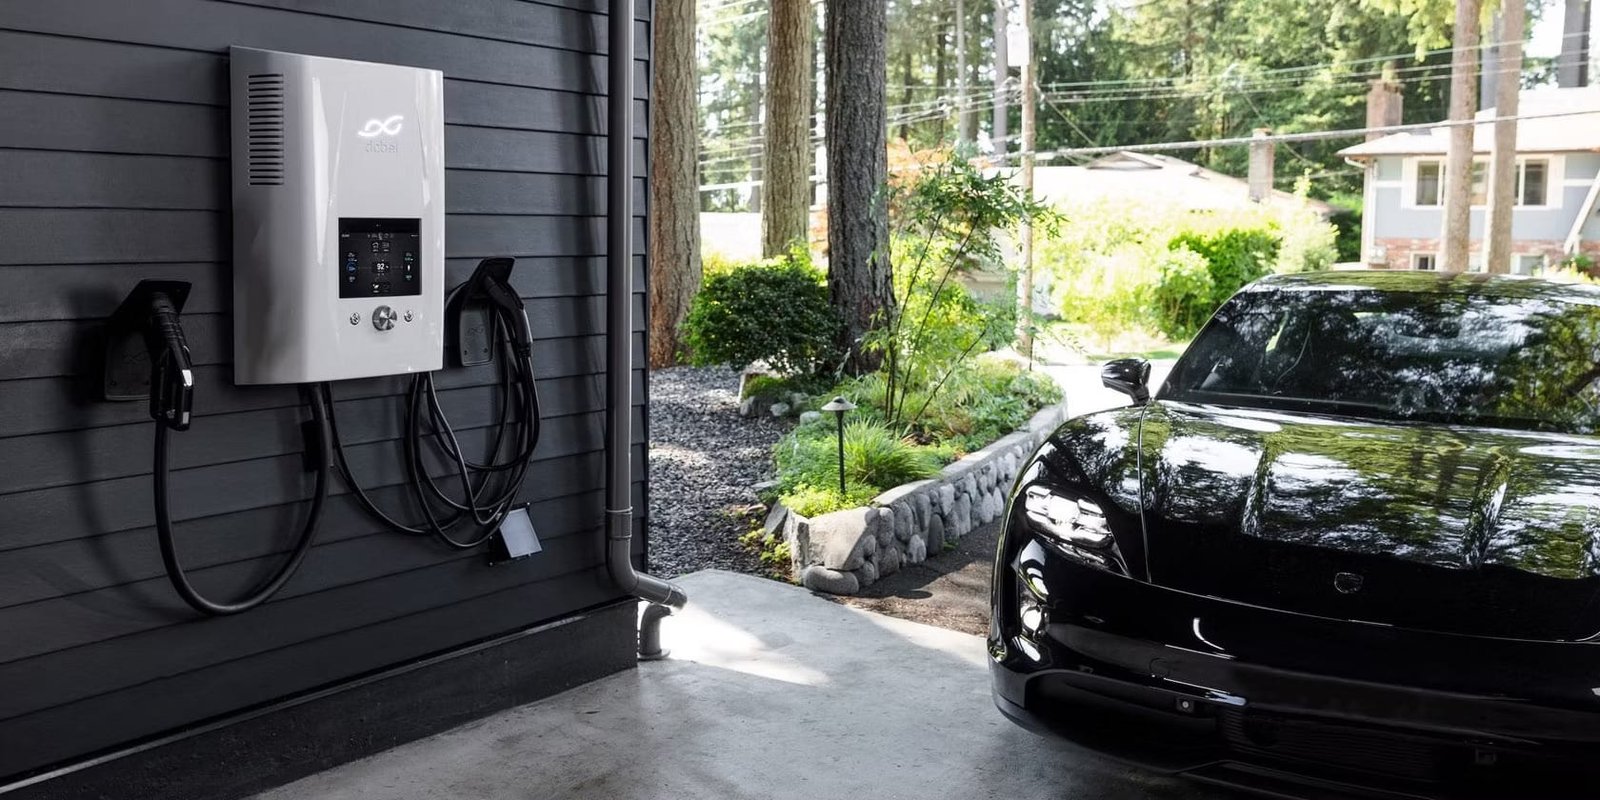 How To Buy And Install An EV Home Charger In Your Home